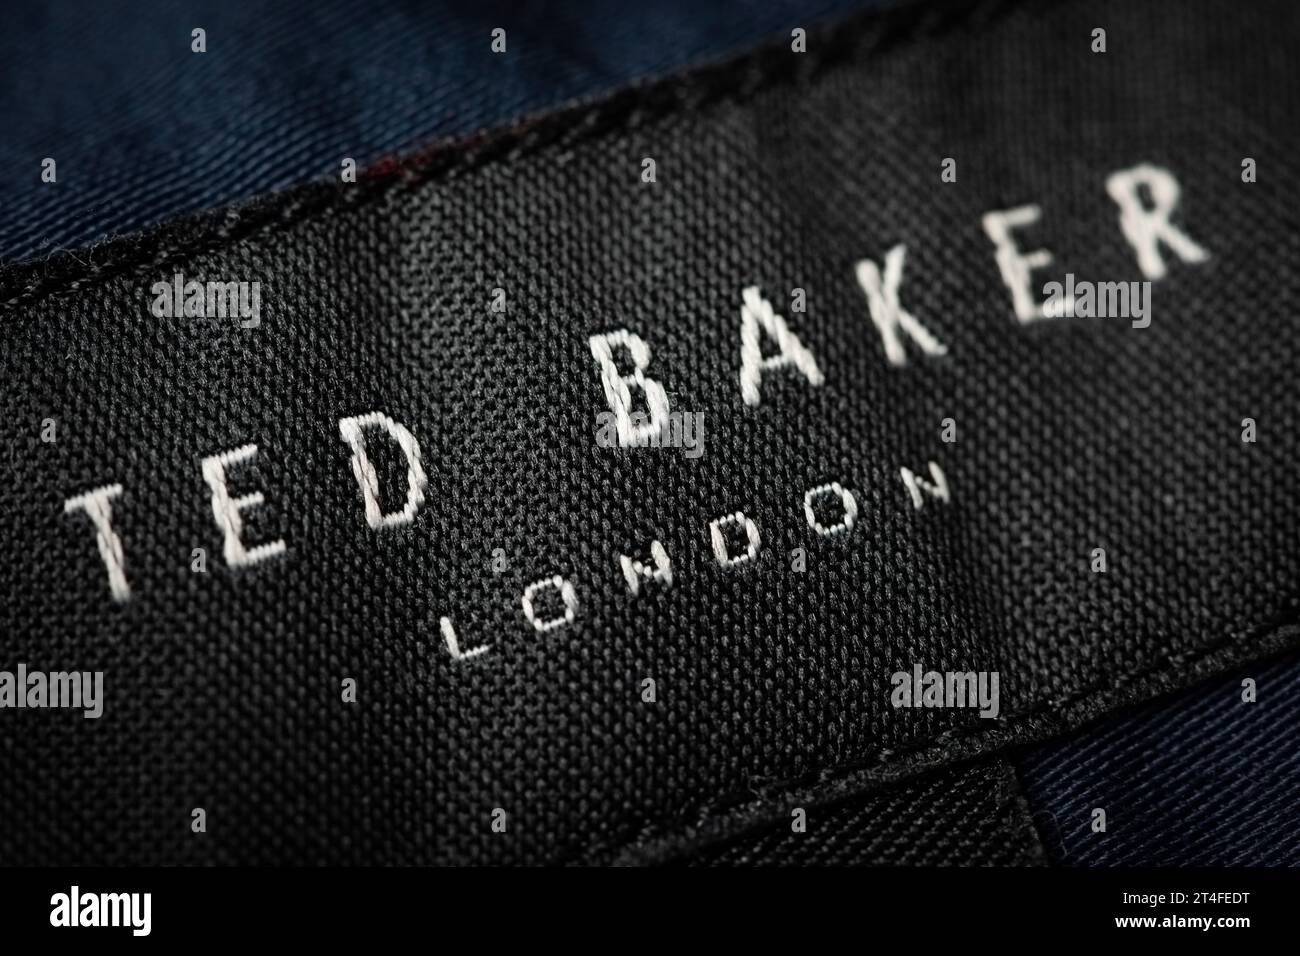 A close-up shot of an embroidered Ted Baker logo as seen on a tag. Stock Photo